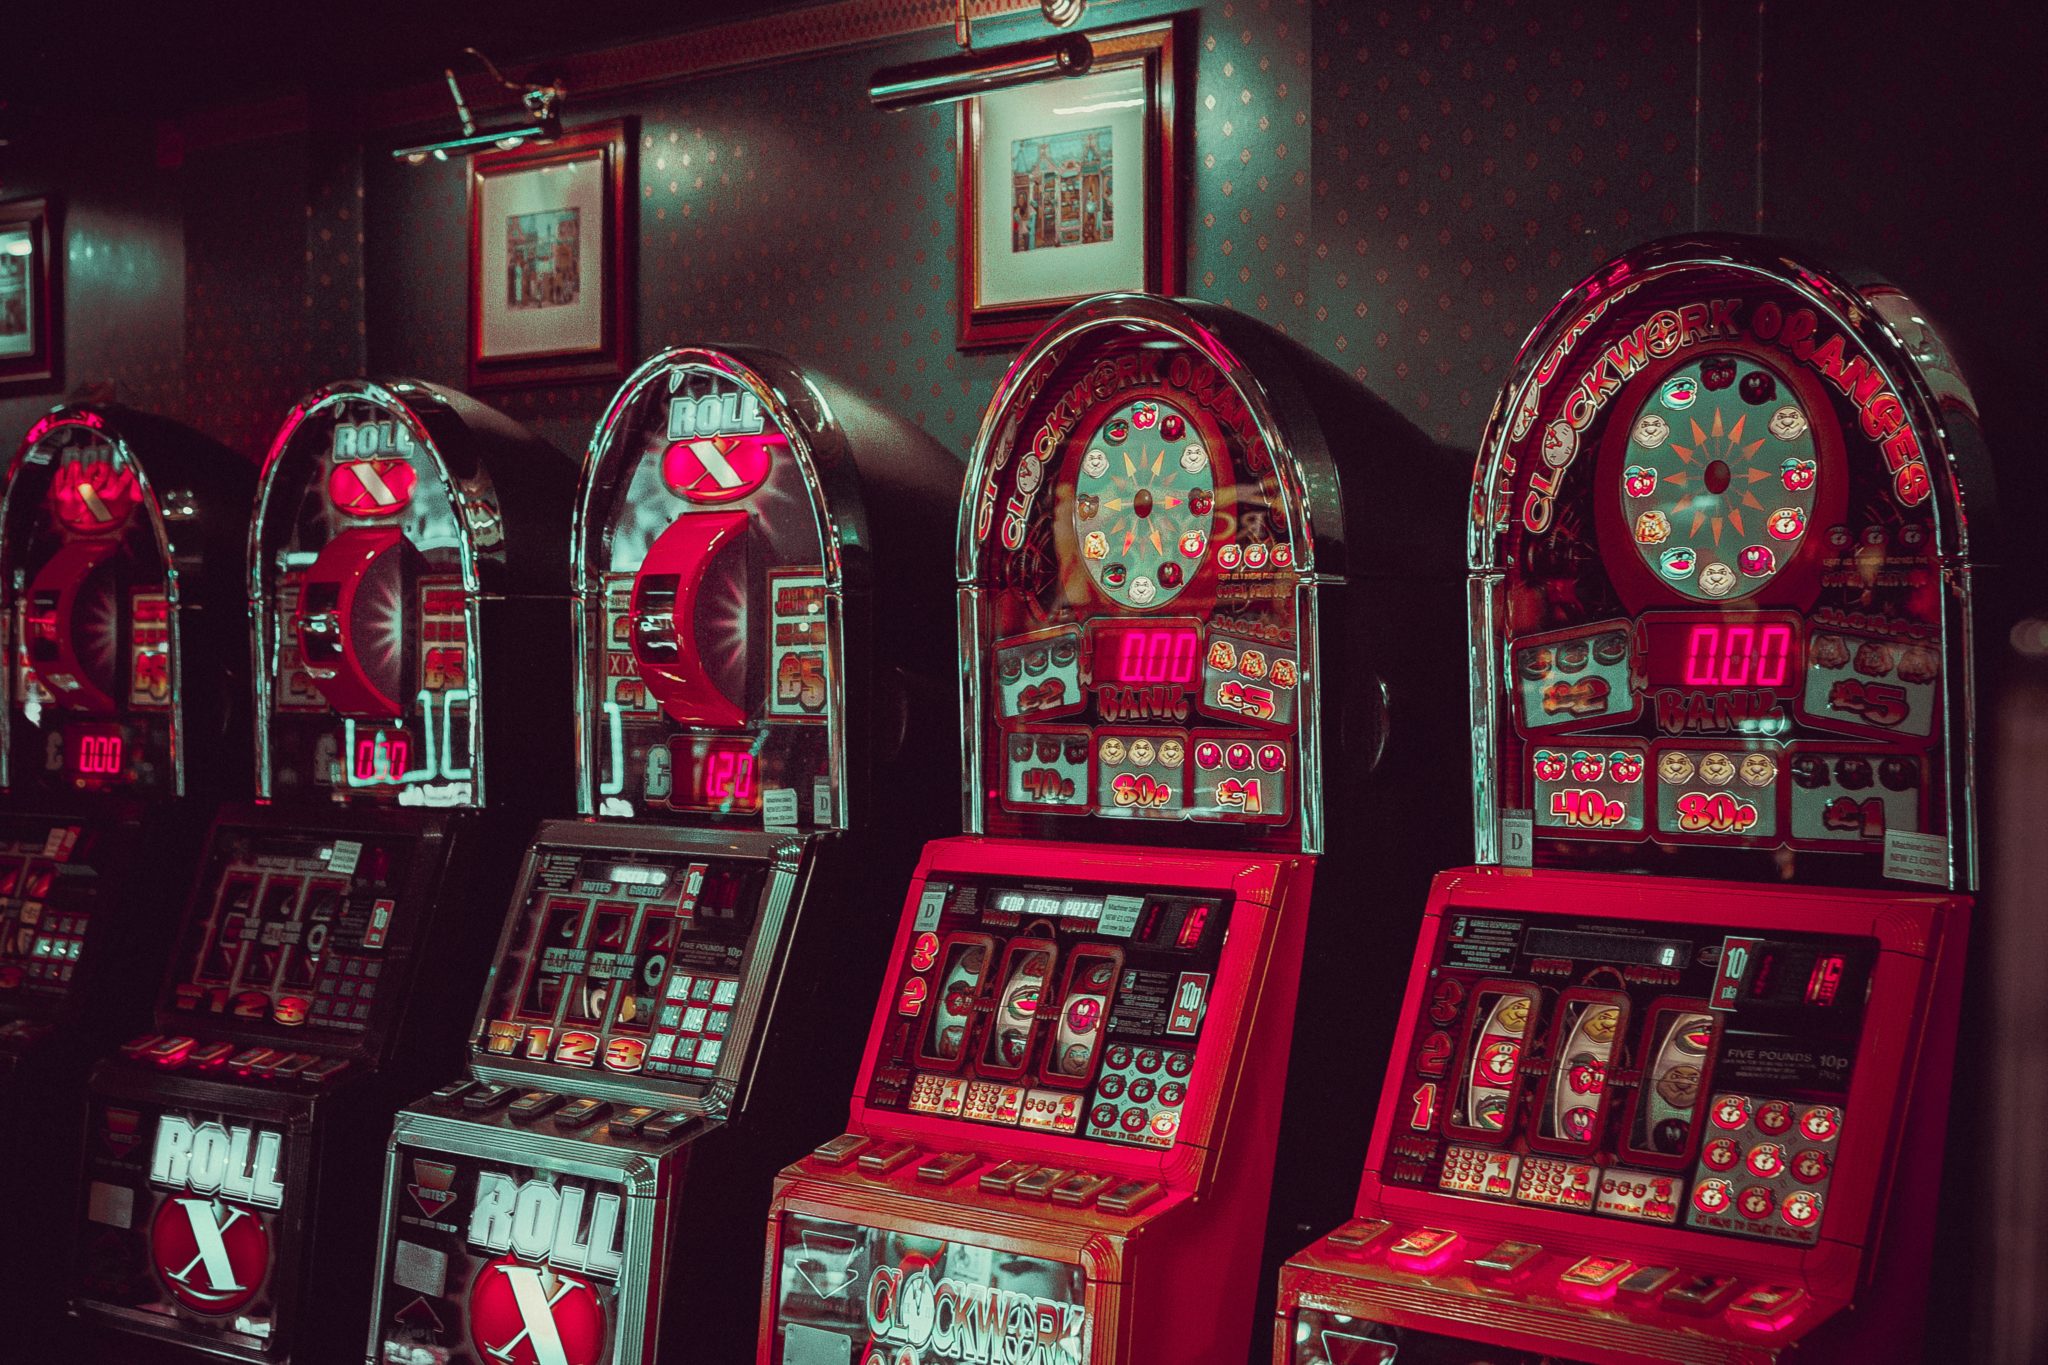 How to Play Slots for Fun and Make Some Cash